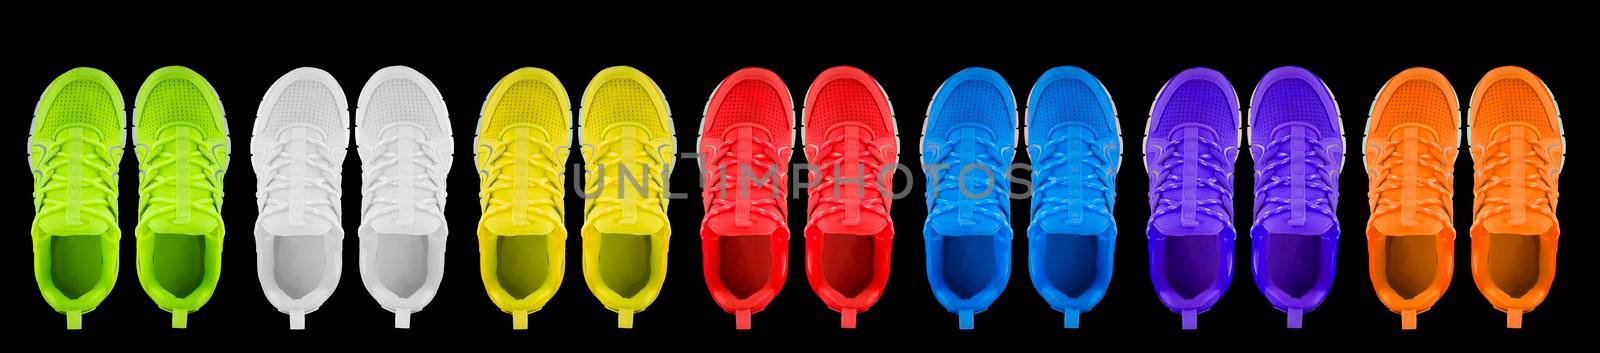 Sneakers in different colors on a black background. Seamless texture of multi-colored shoes.